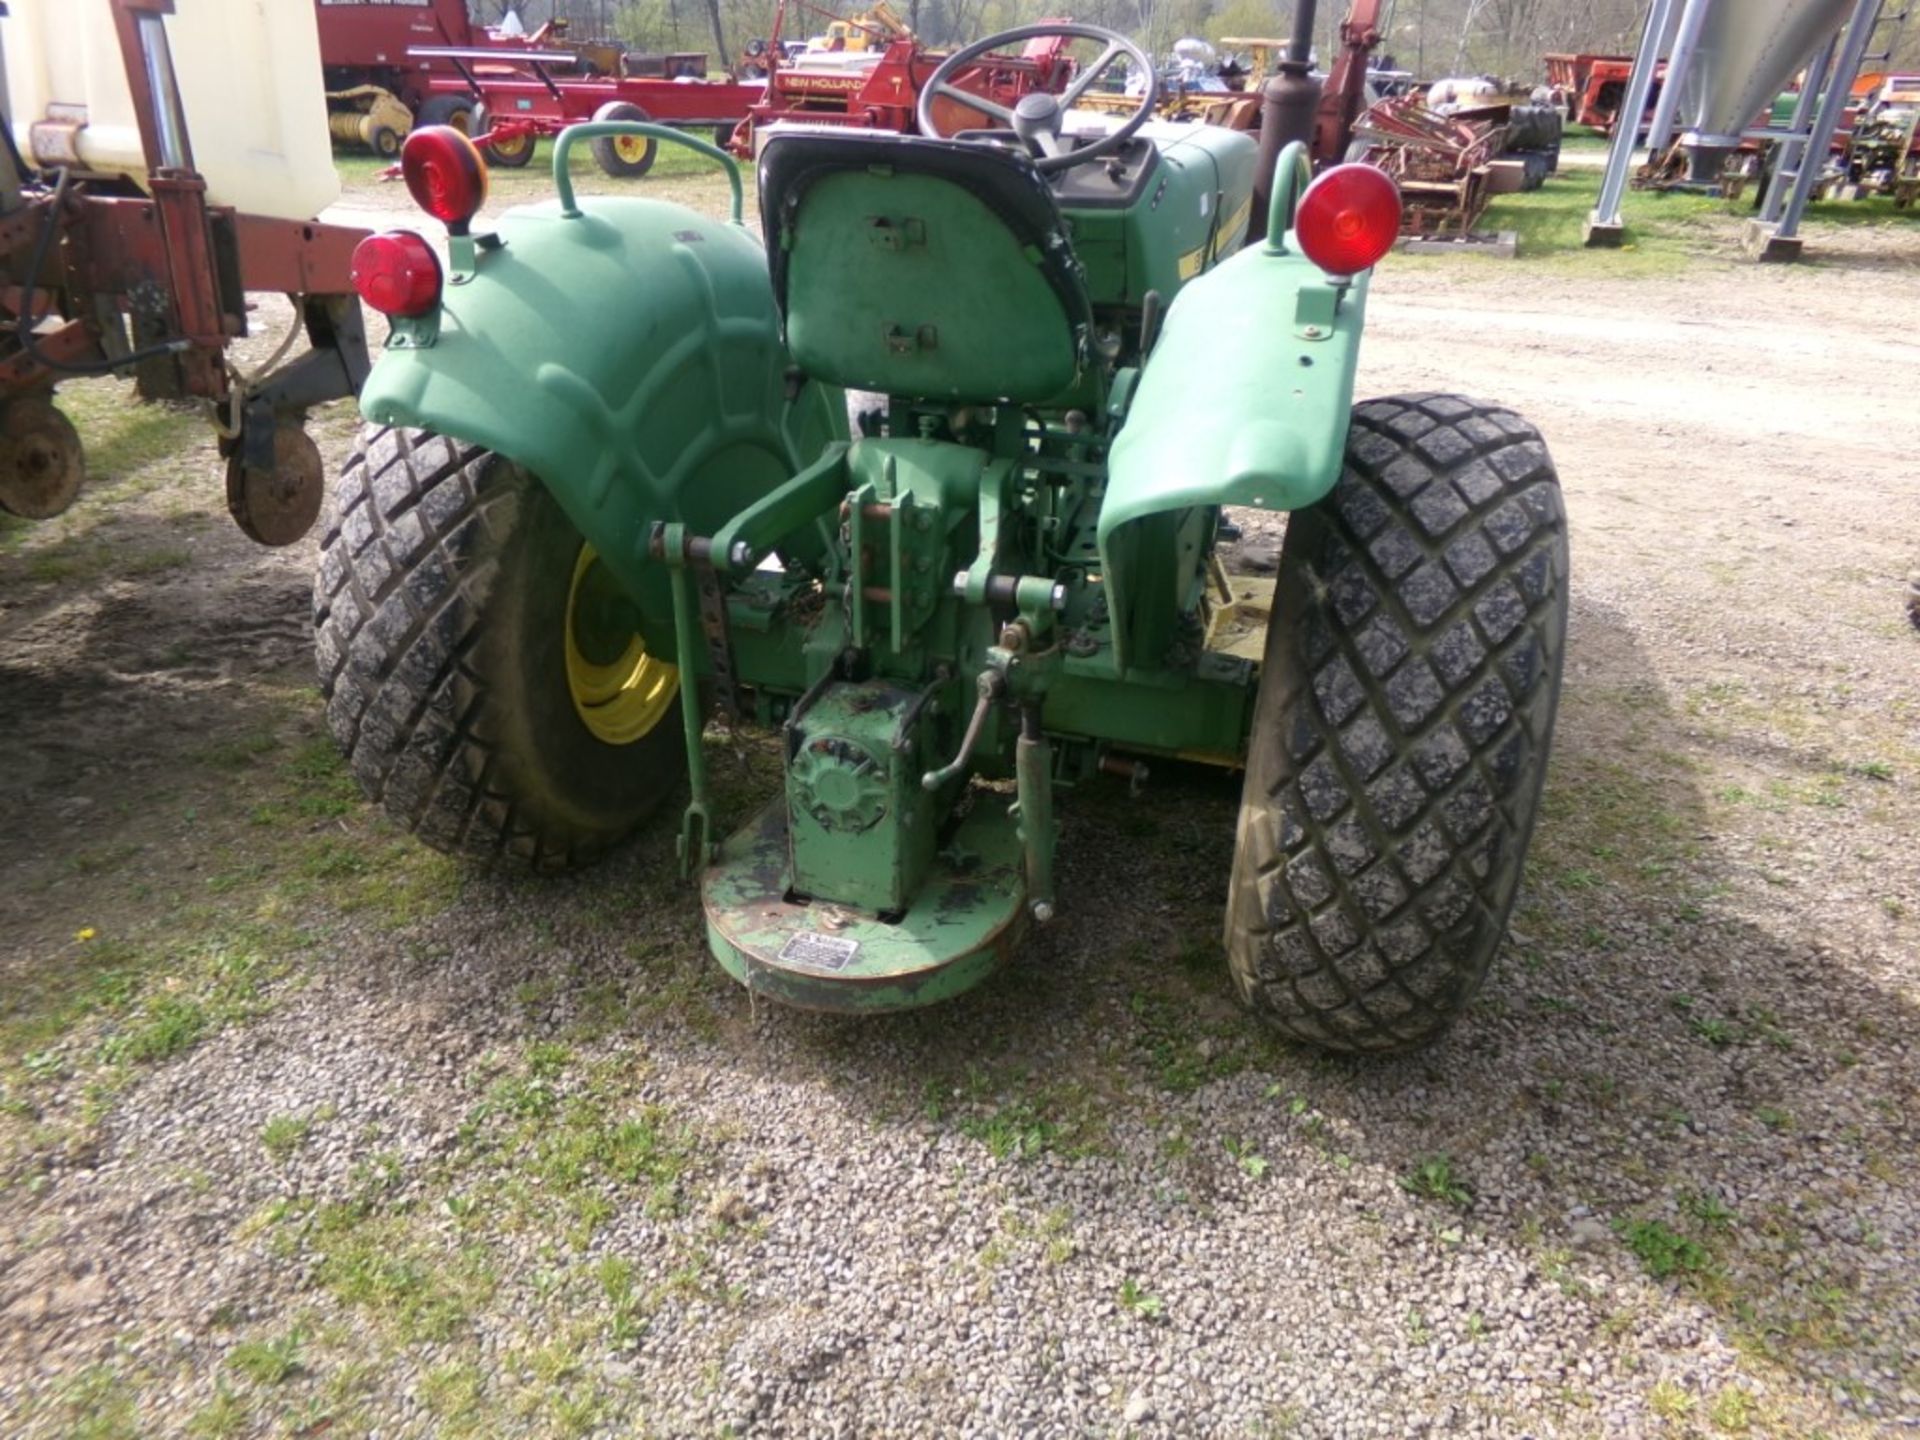 John Deere 850 2 WD Tractor with 72'' Belly Mower, 3970, MISSING 3 PT ARMS (5765) - Image 3 of 3